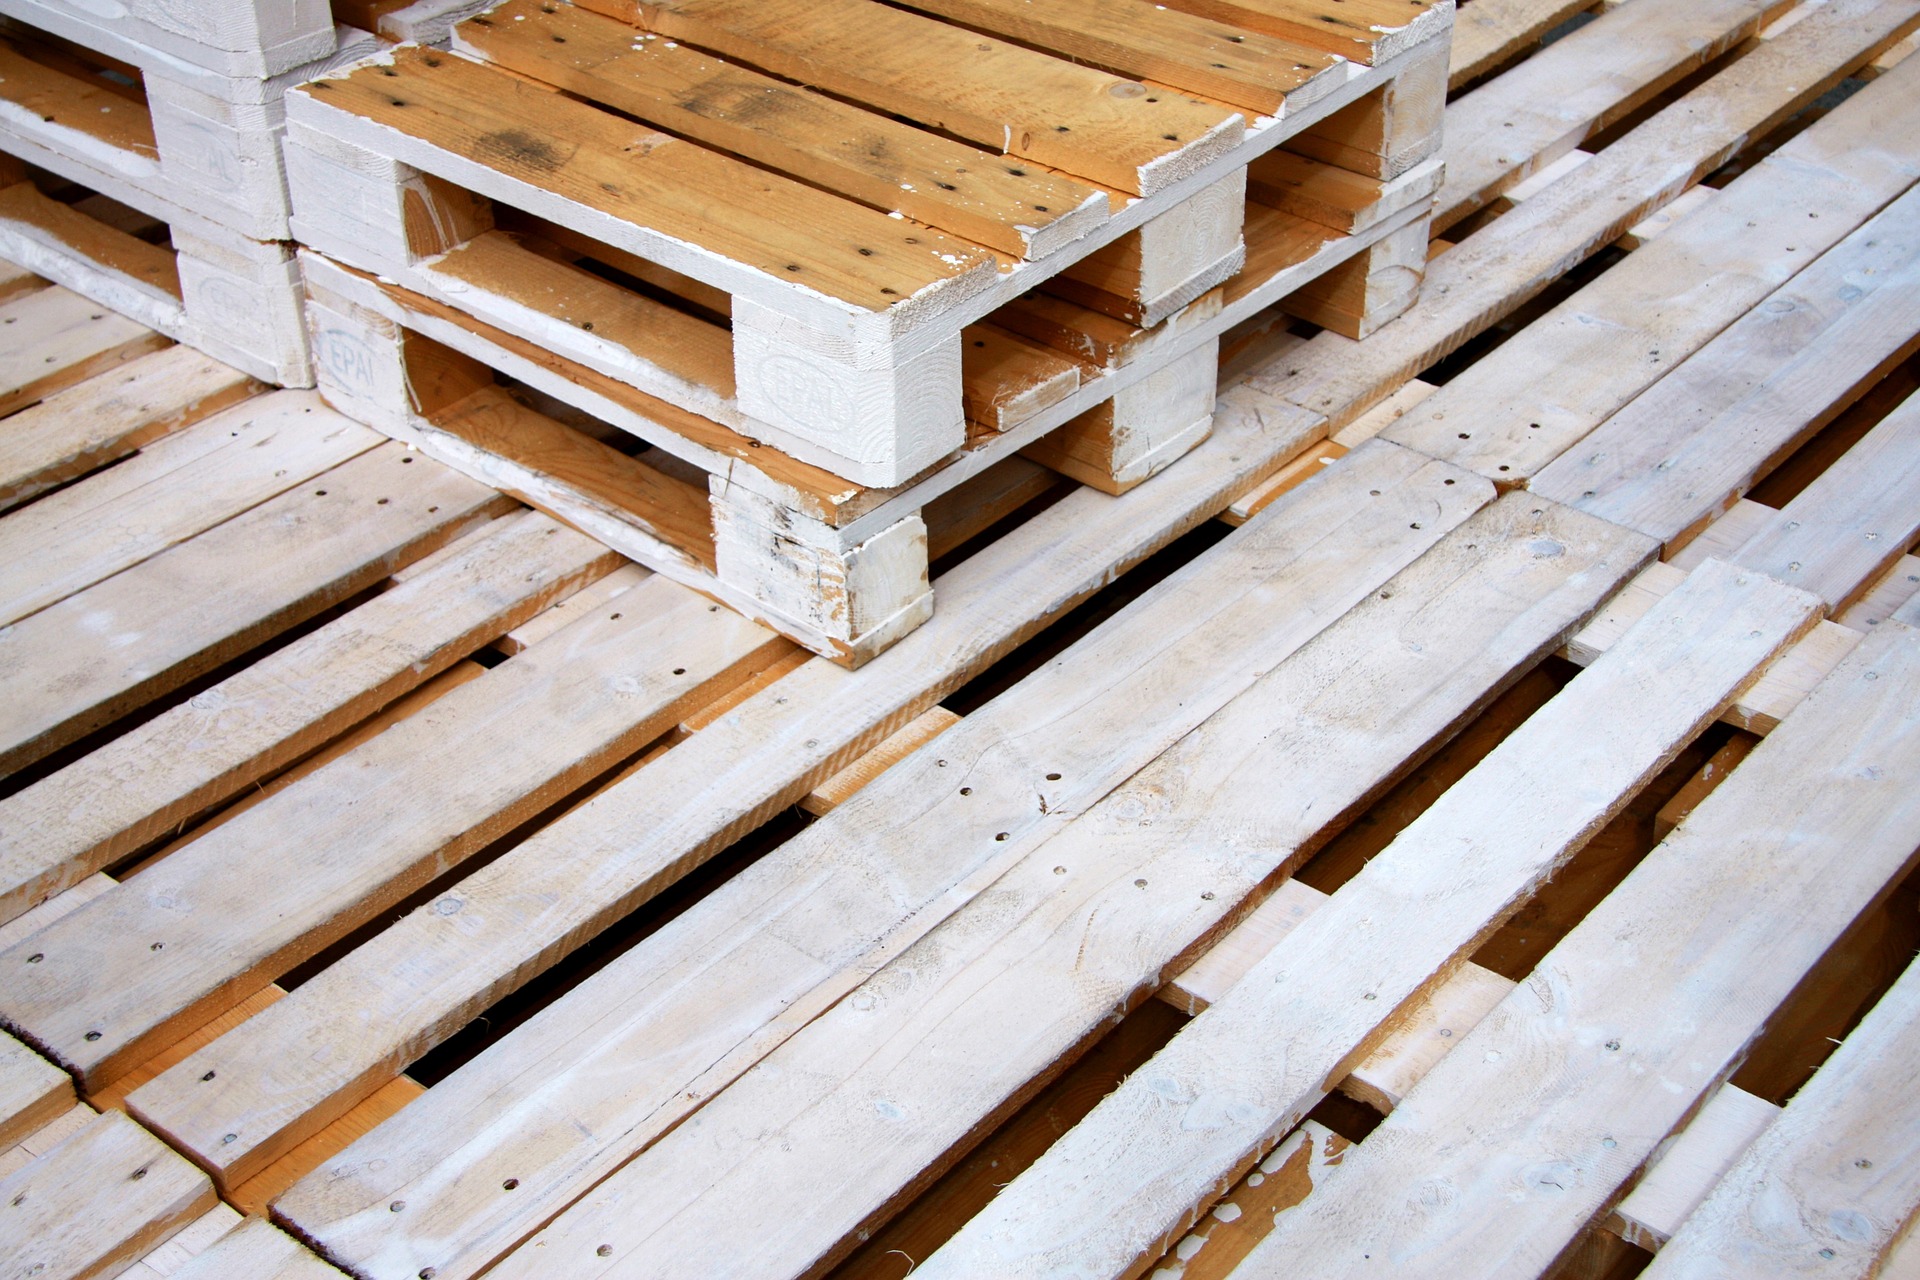 8 Undeniably Creative Things to Do with a Humble Wooden Pallet